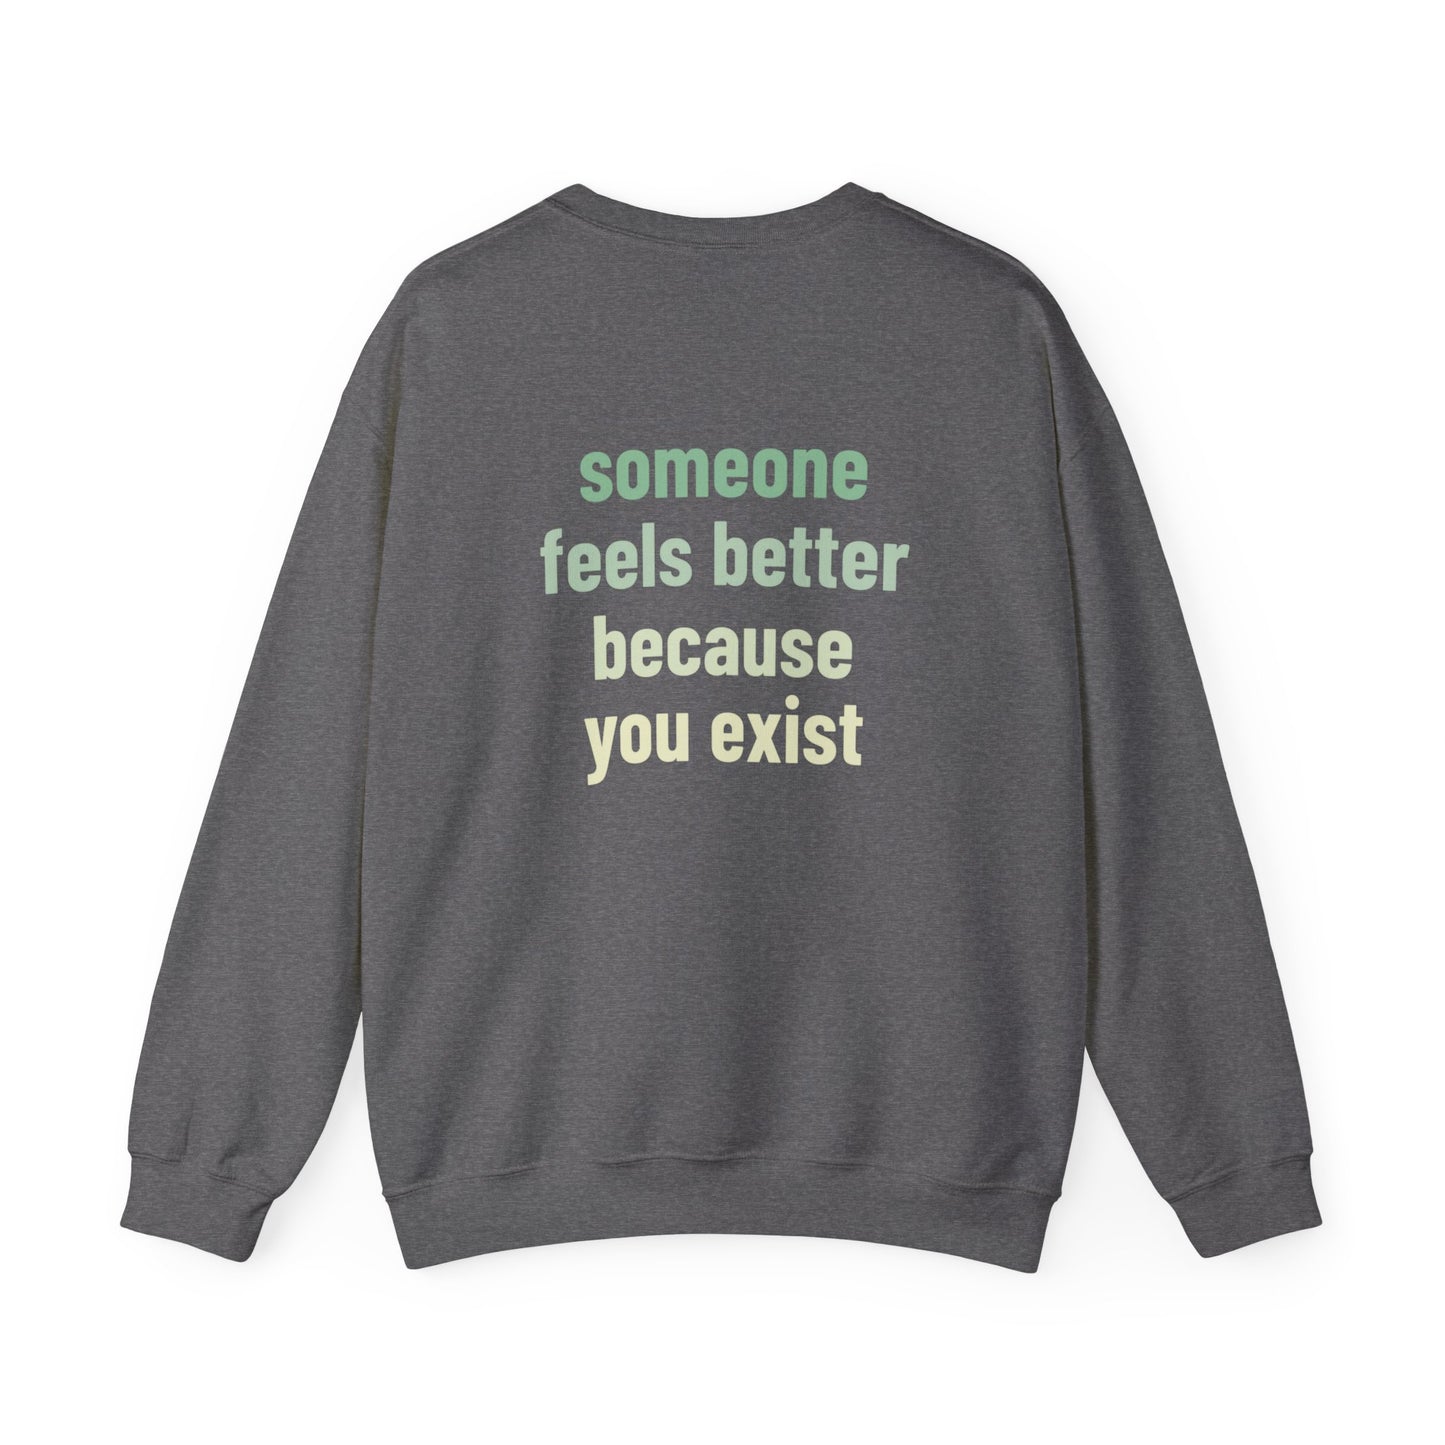 Someone feels better because you exist Crewneck Sweatshirt